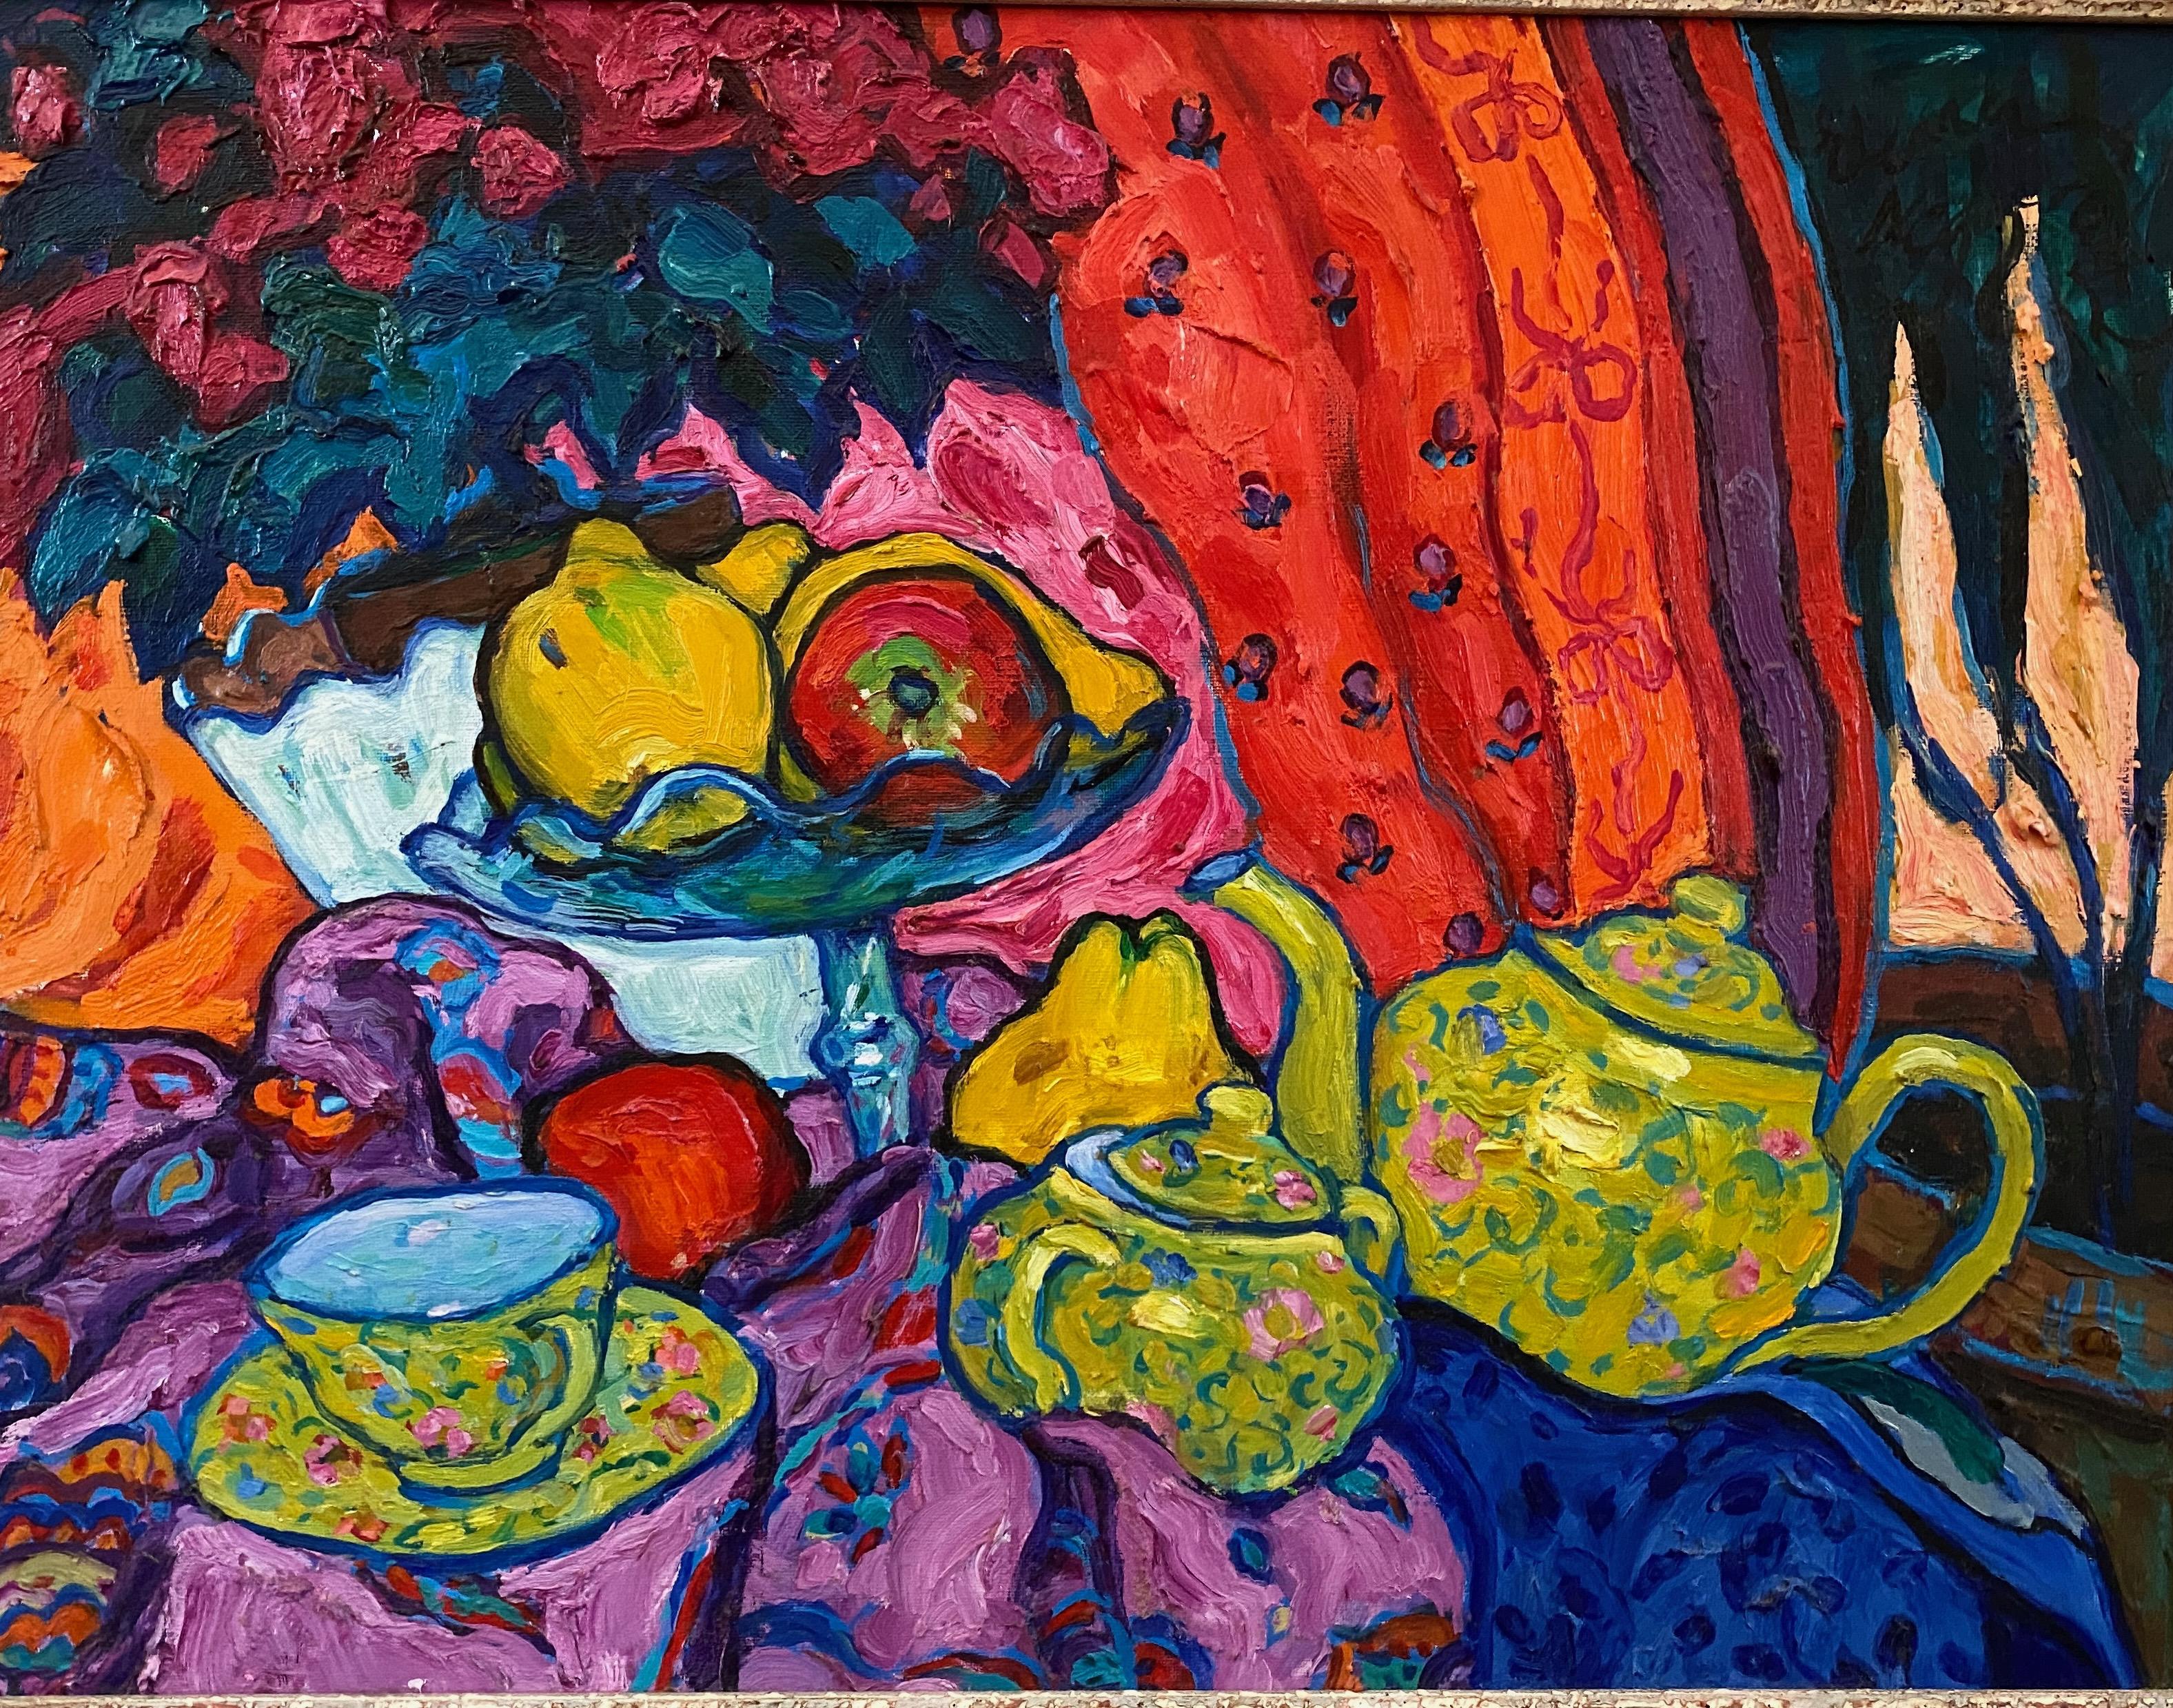 Elena Negueroles Still-Life Painting - Still-life with teapot. Figurative and colorful Oil Painting in Fauvist style.